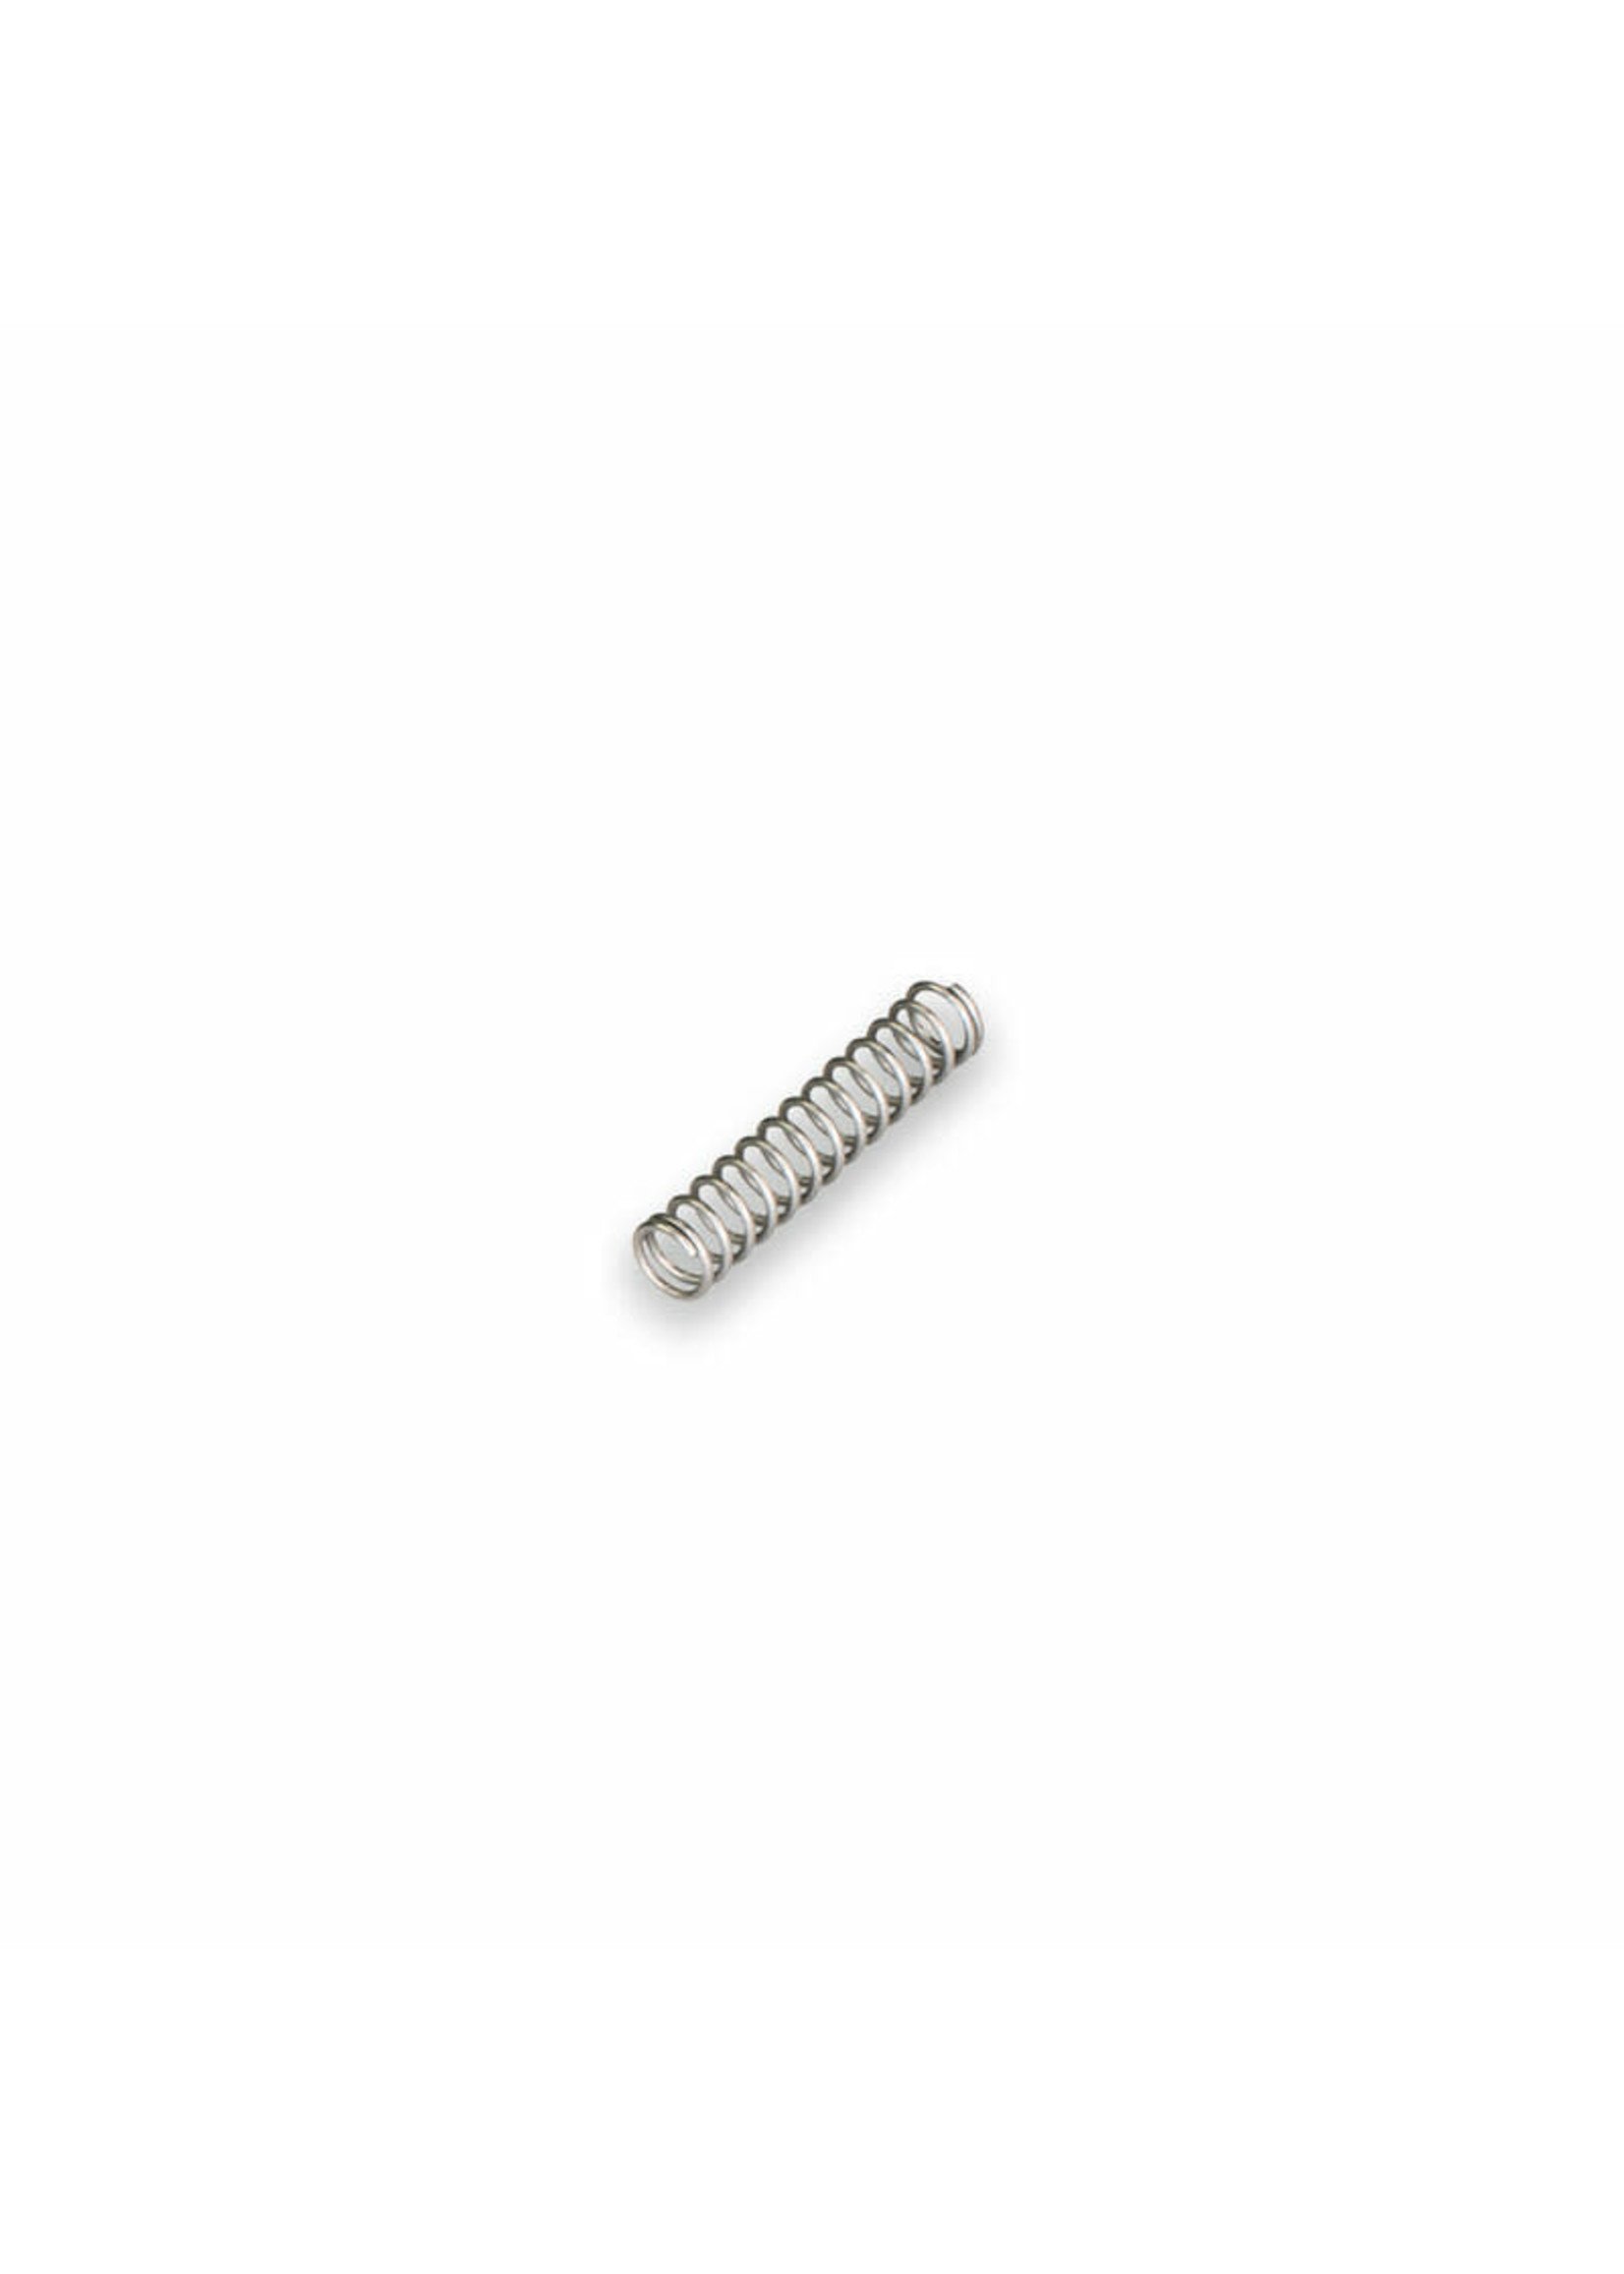 Disruptive Tactical M16 / AR10 / DT15 Buffer Retainer Spring